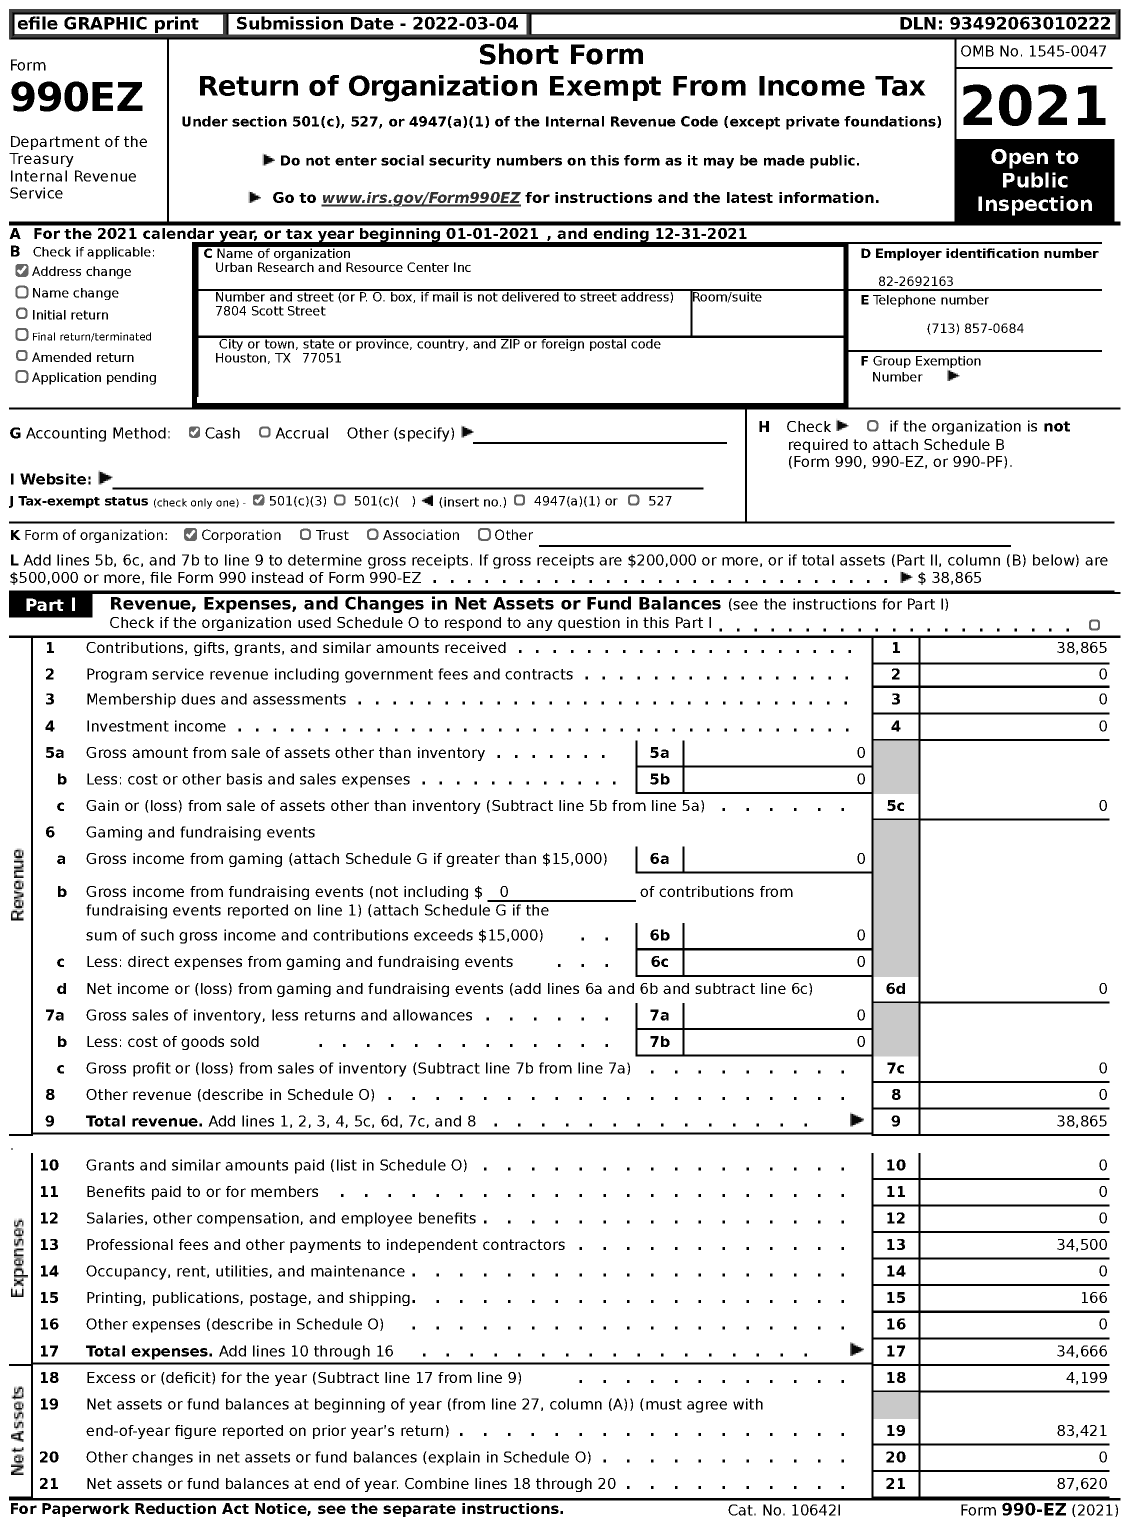 Image of first page of 2021 Form 990EZ for Urban Research and Resource Center